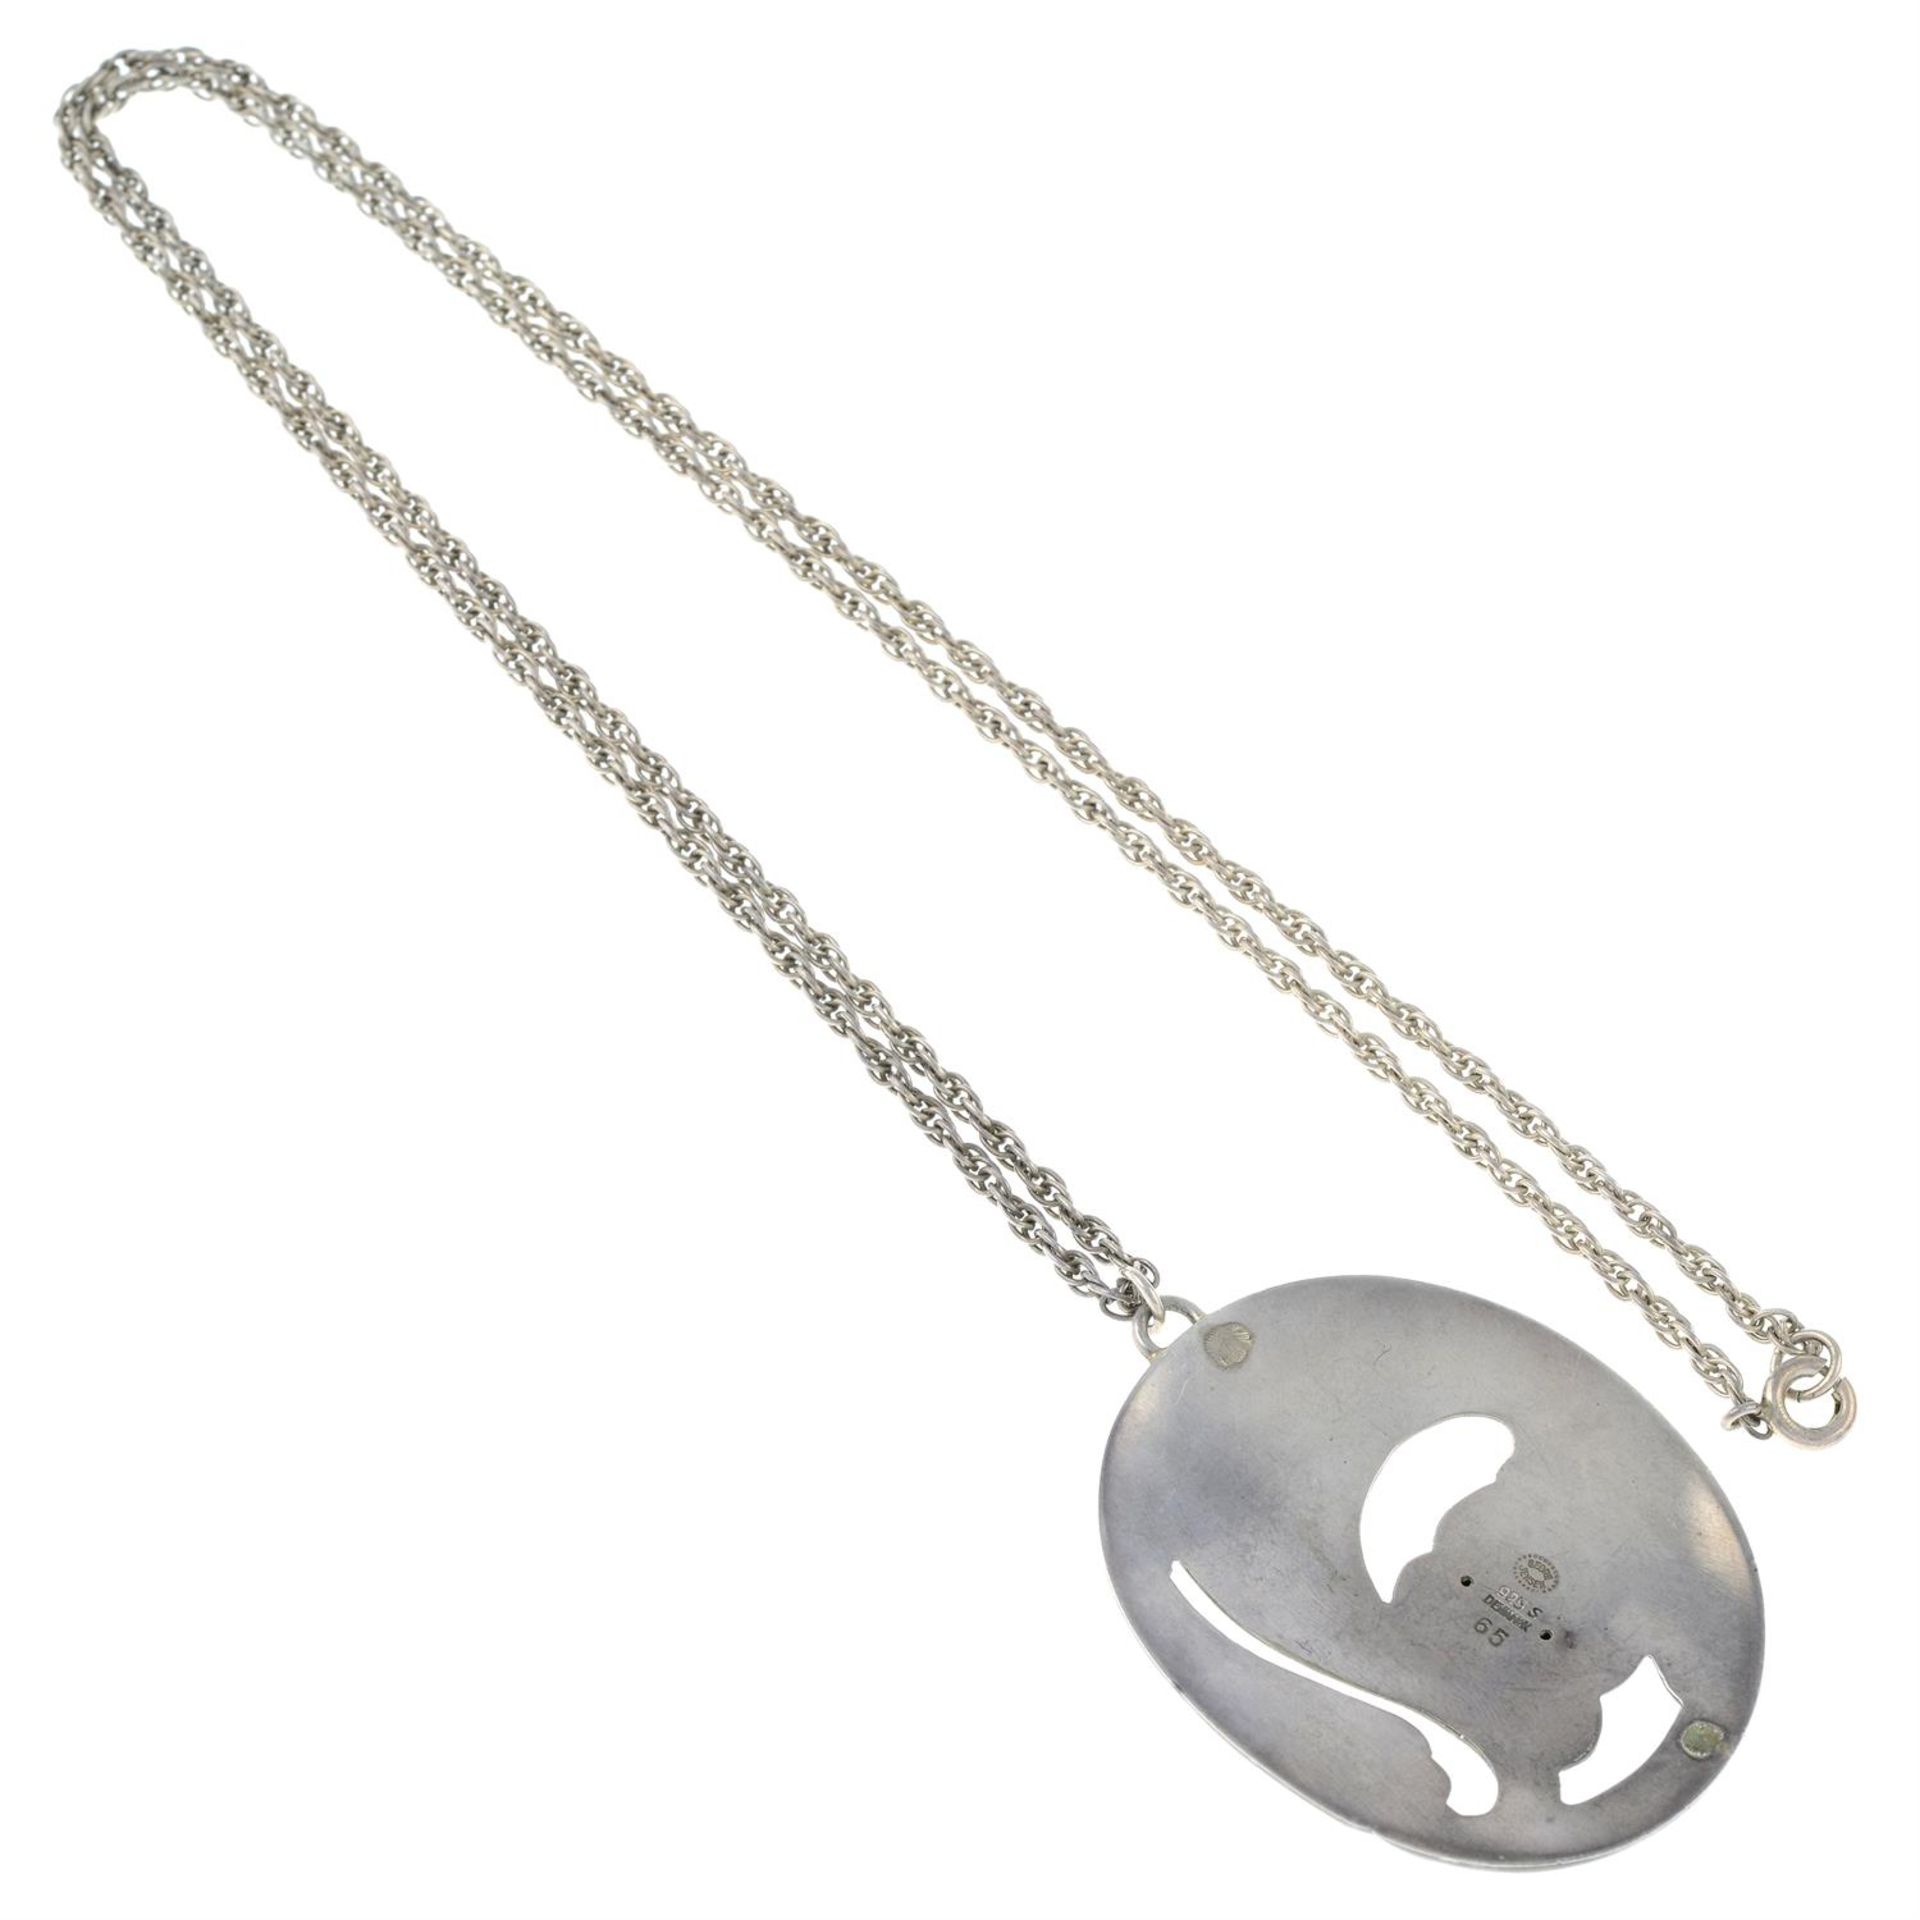 A berry and foliate pendant, by Georg Jensen, with chain. - Image 2 of 2